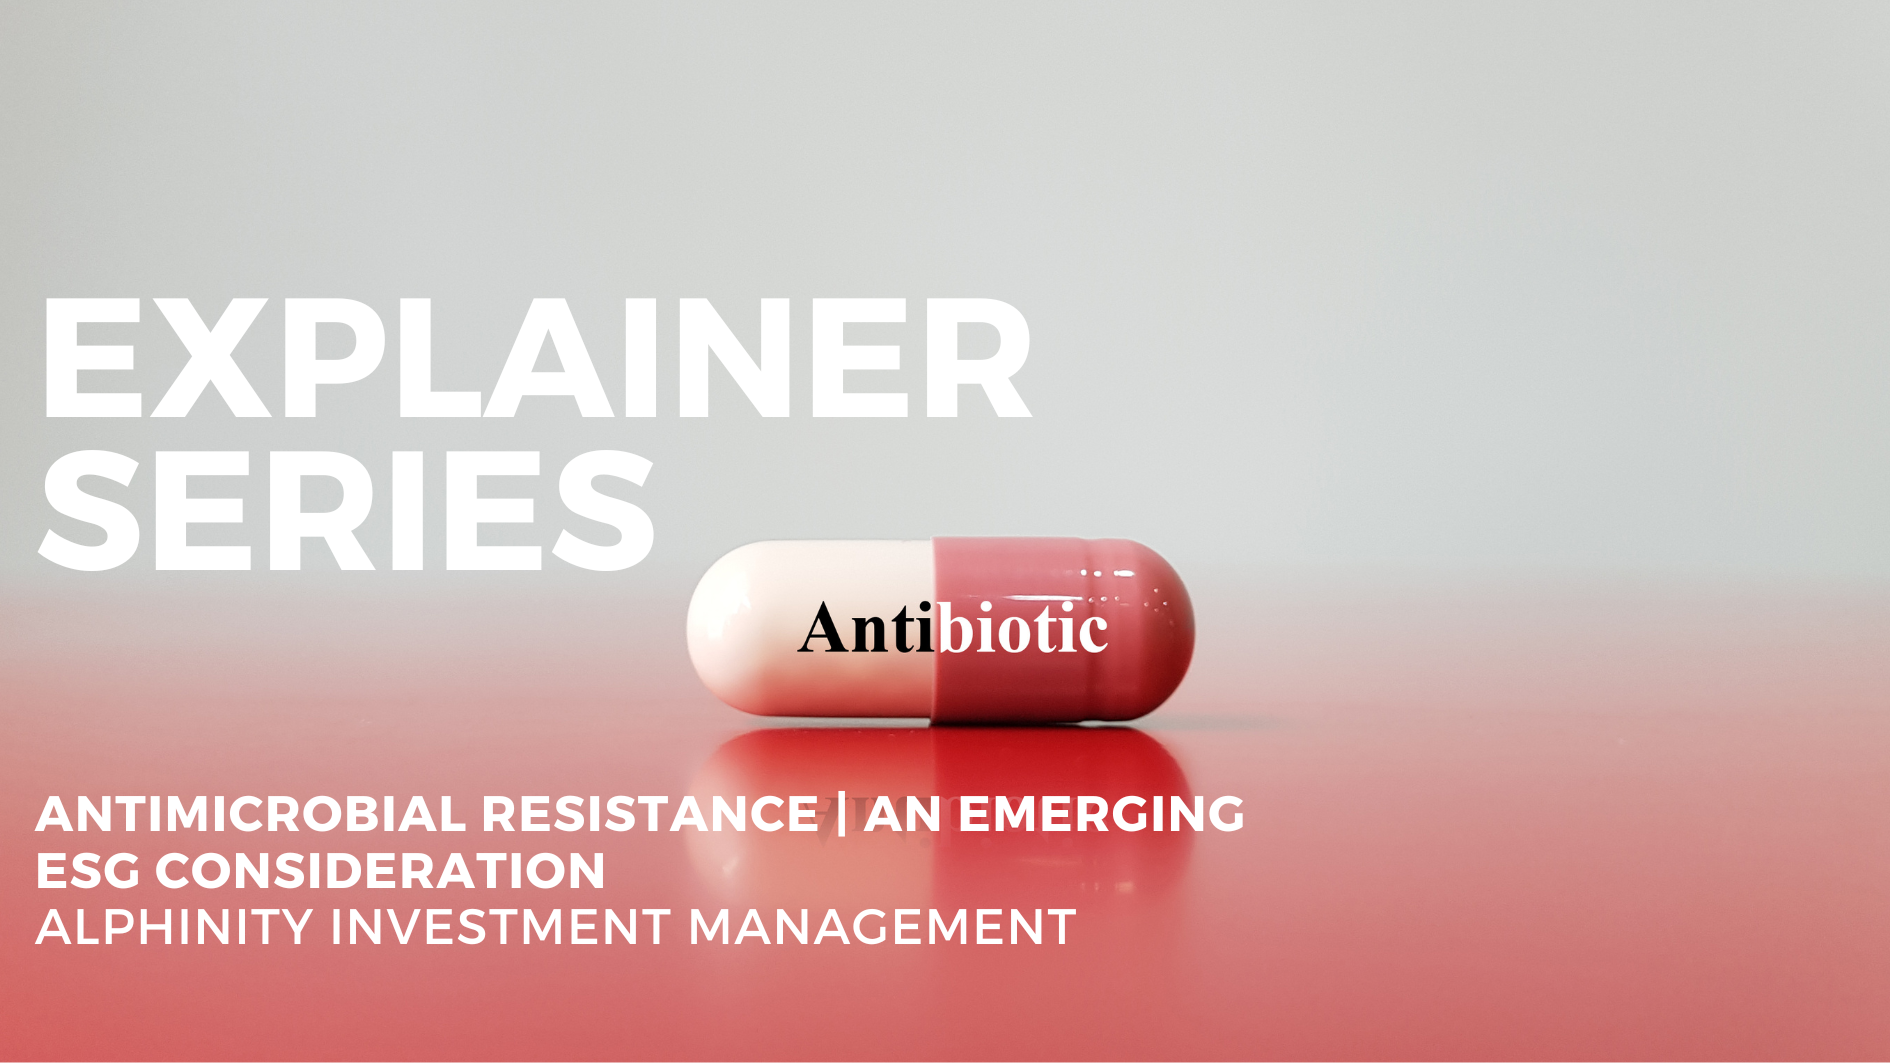 article/Alphinity Investment Management/Explainer_Series__Antimicrobial_Resistance___An__xu0r7np.png